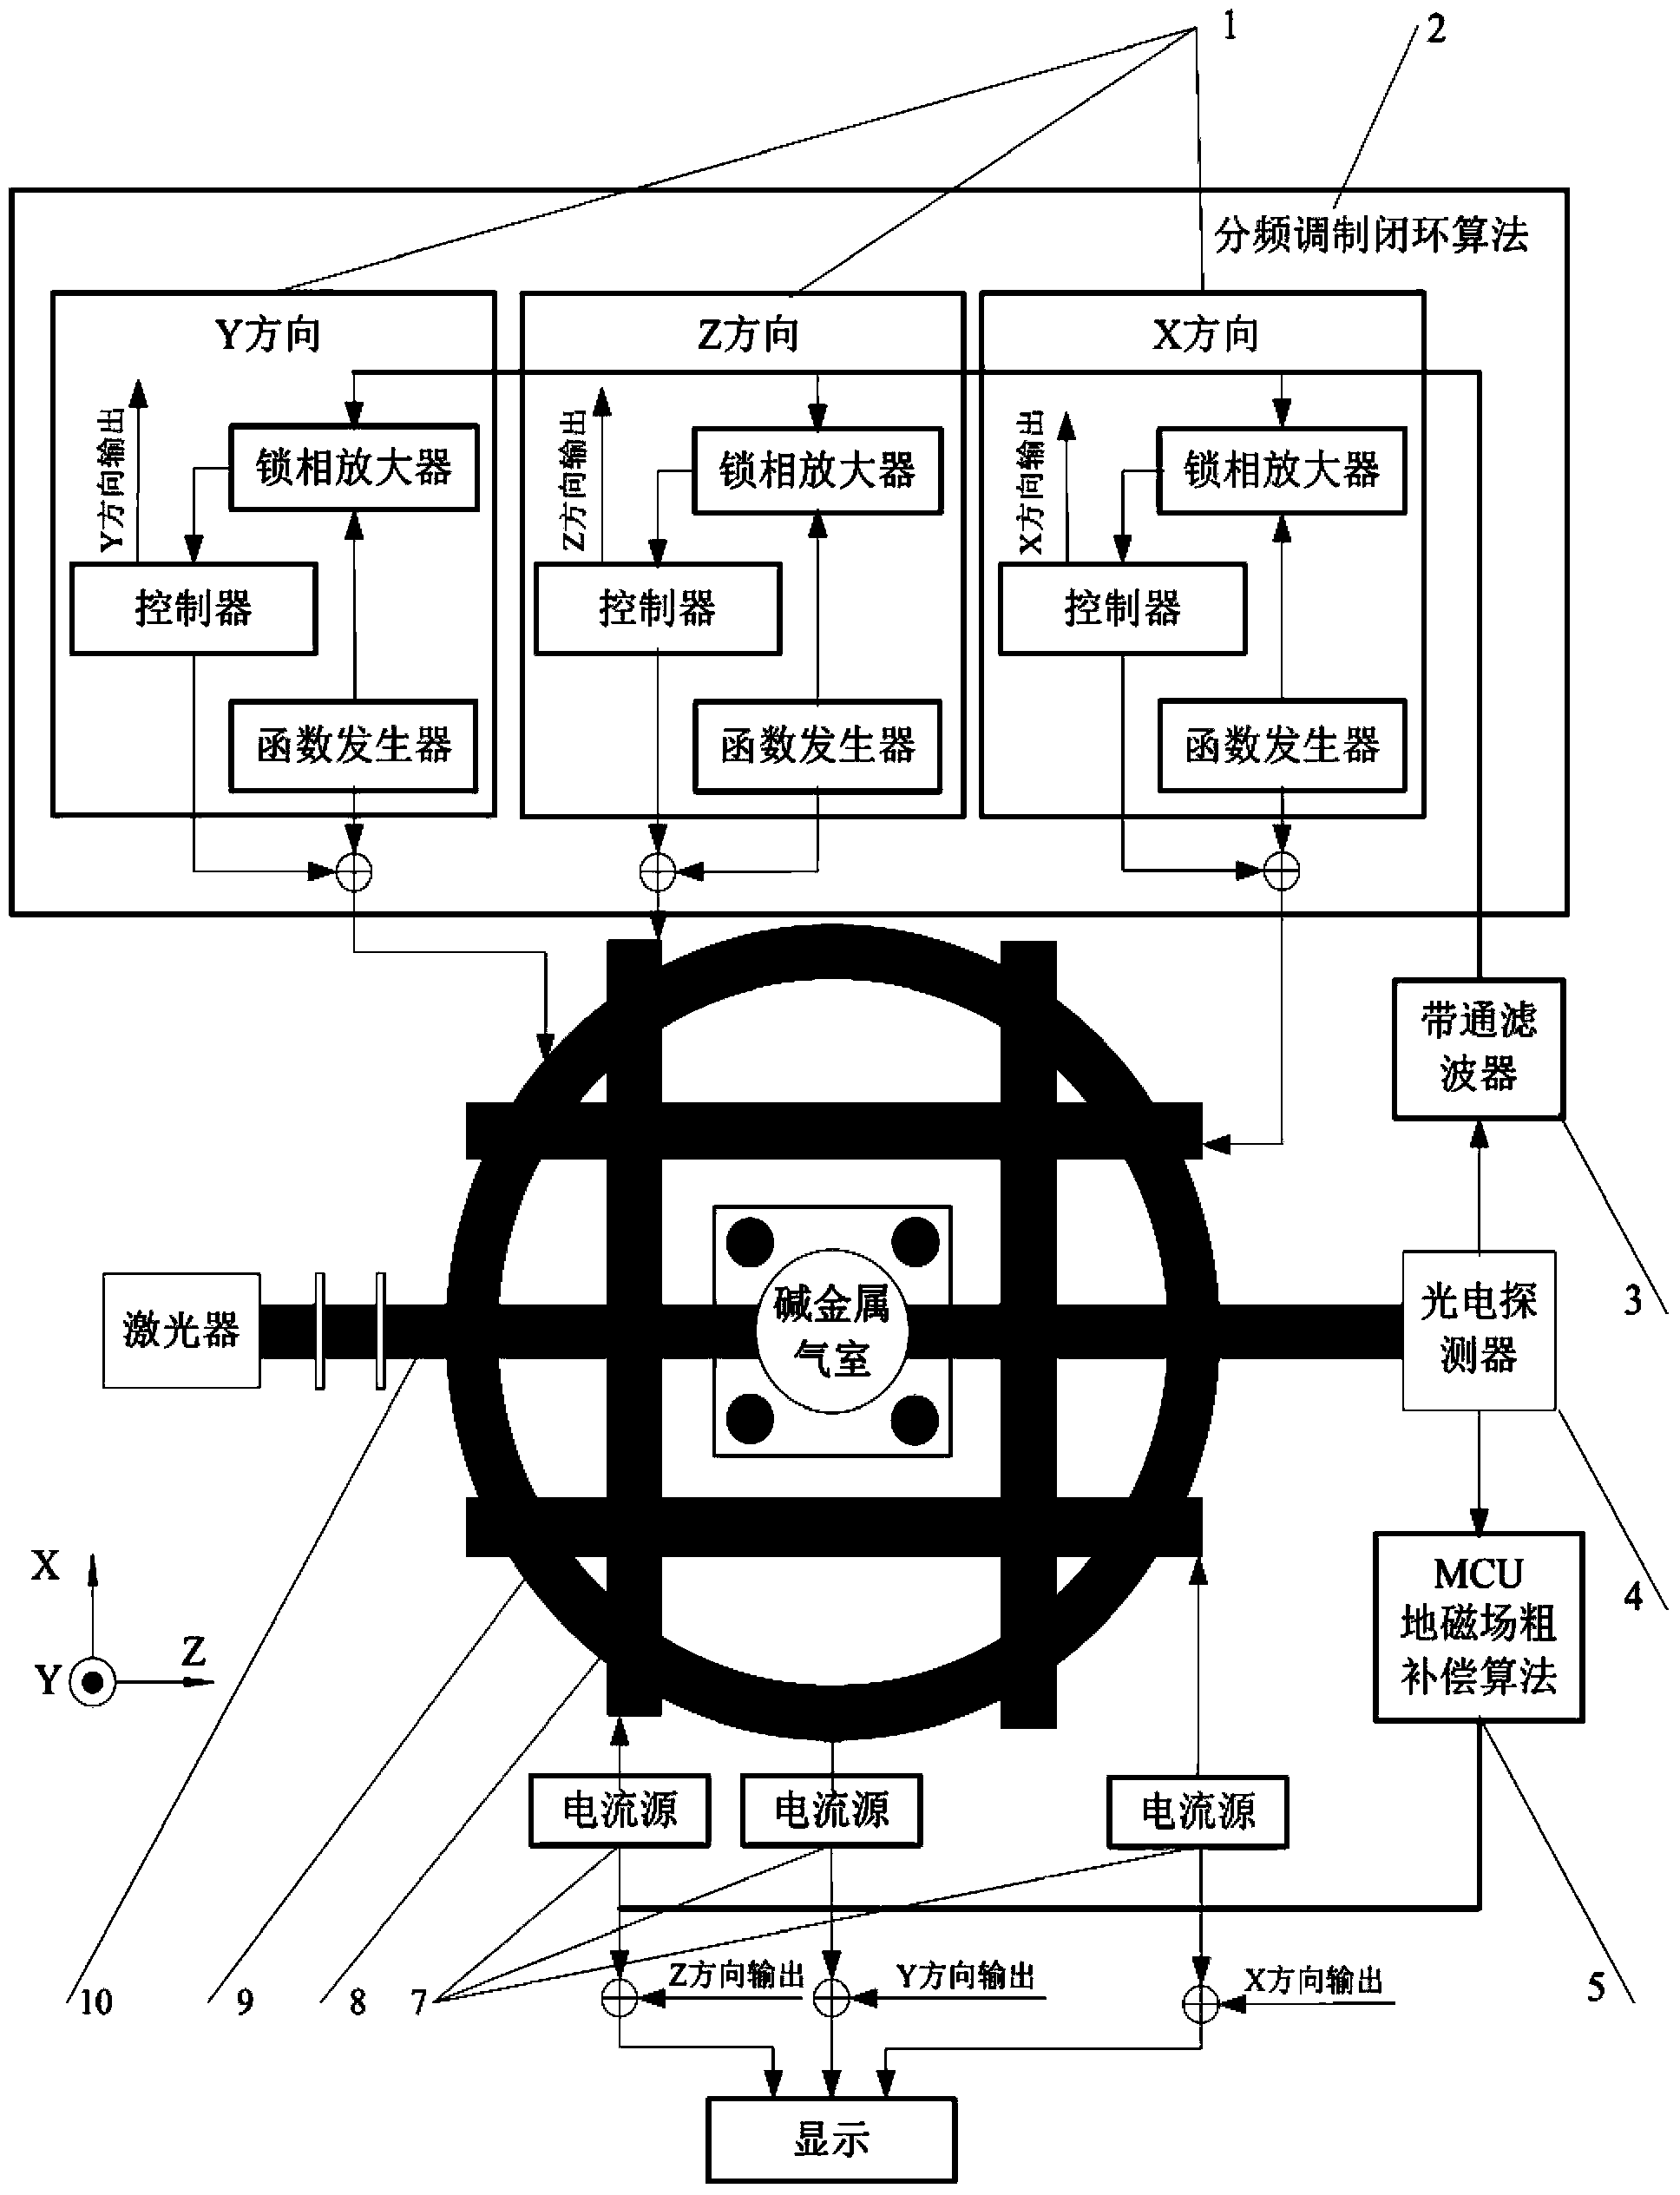 Single-beam unshielded atom magnetometer and detection method thereof